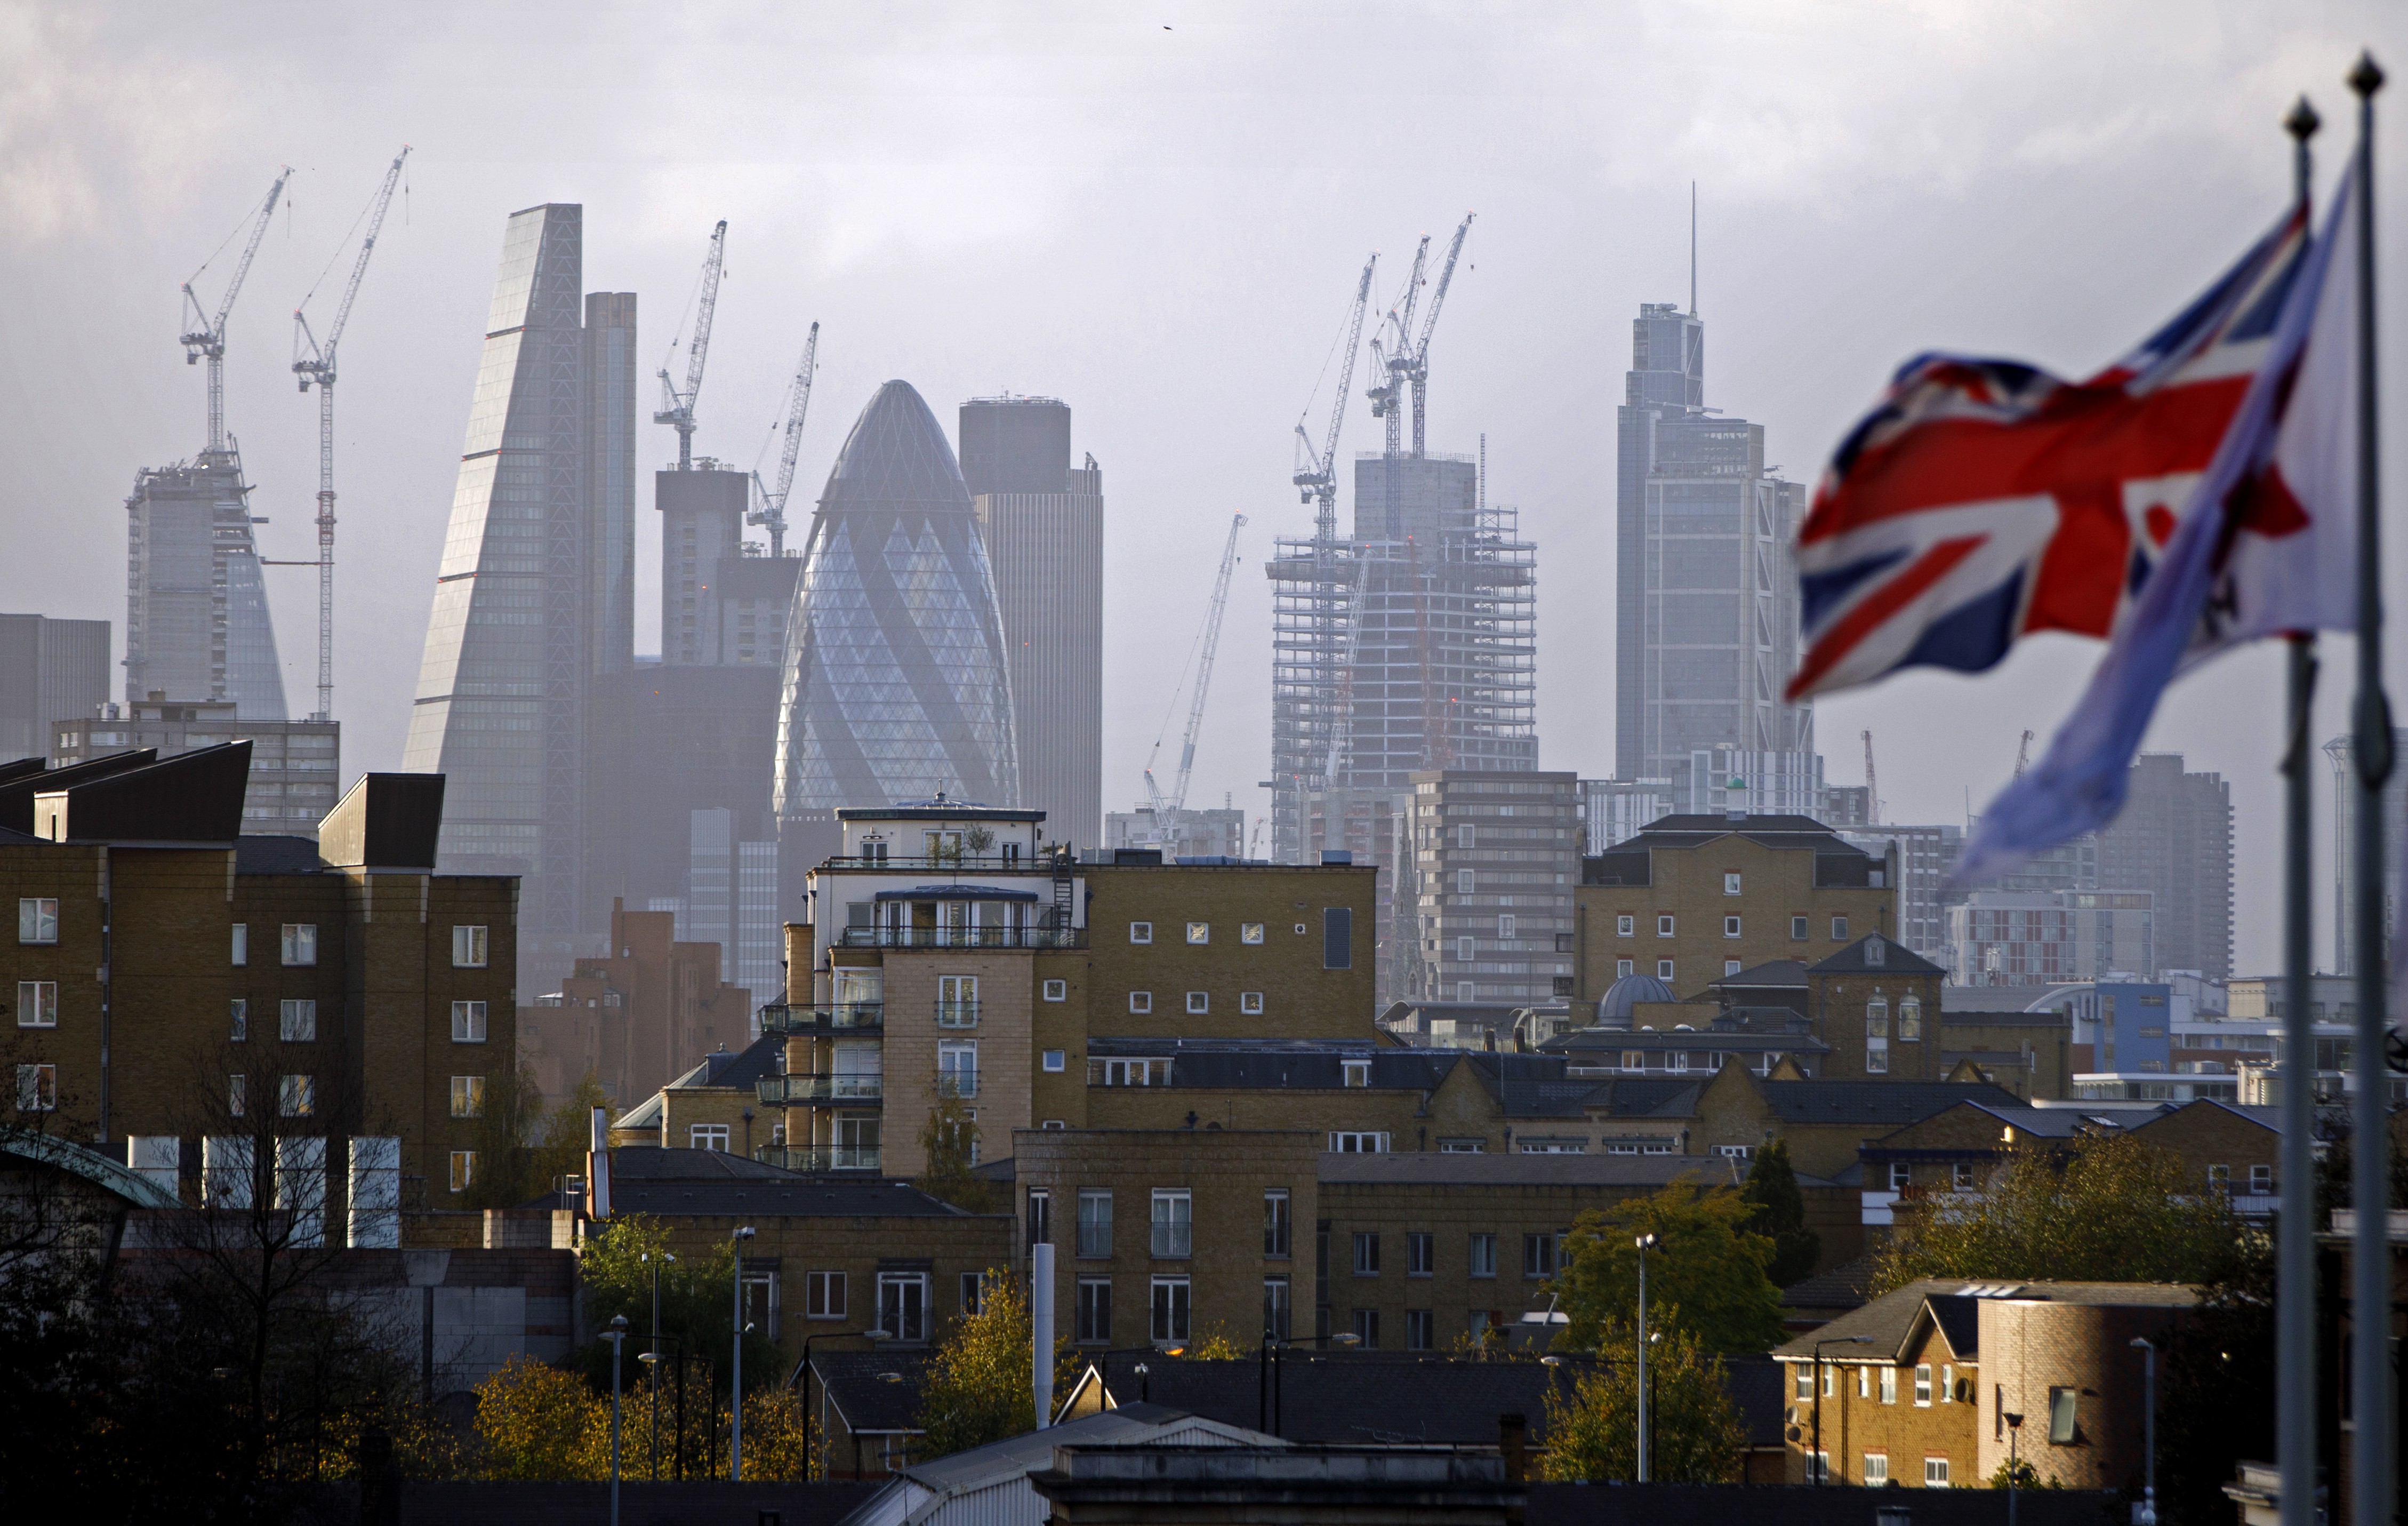 Construction cranes stand near skyscrapers in the City of London. Applications for so-called tier-1 investor visas to the UK by ultra-wealthy Chinese jumped by more than half in the first quarter of 2019. Photo: AFP